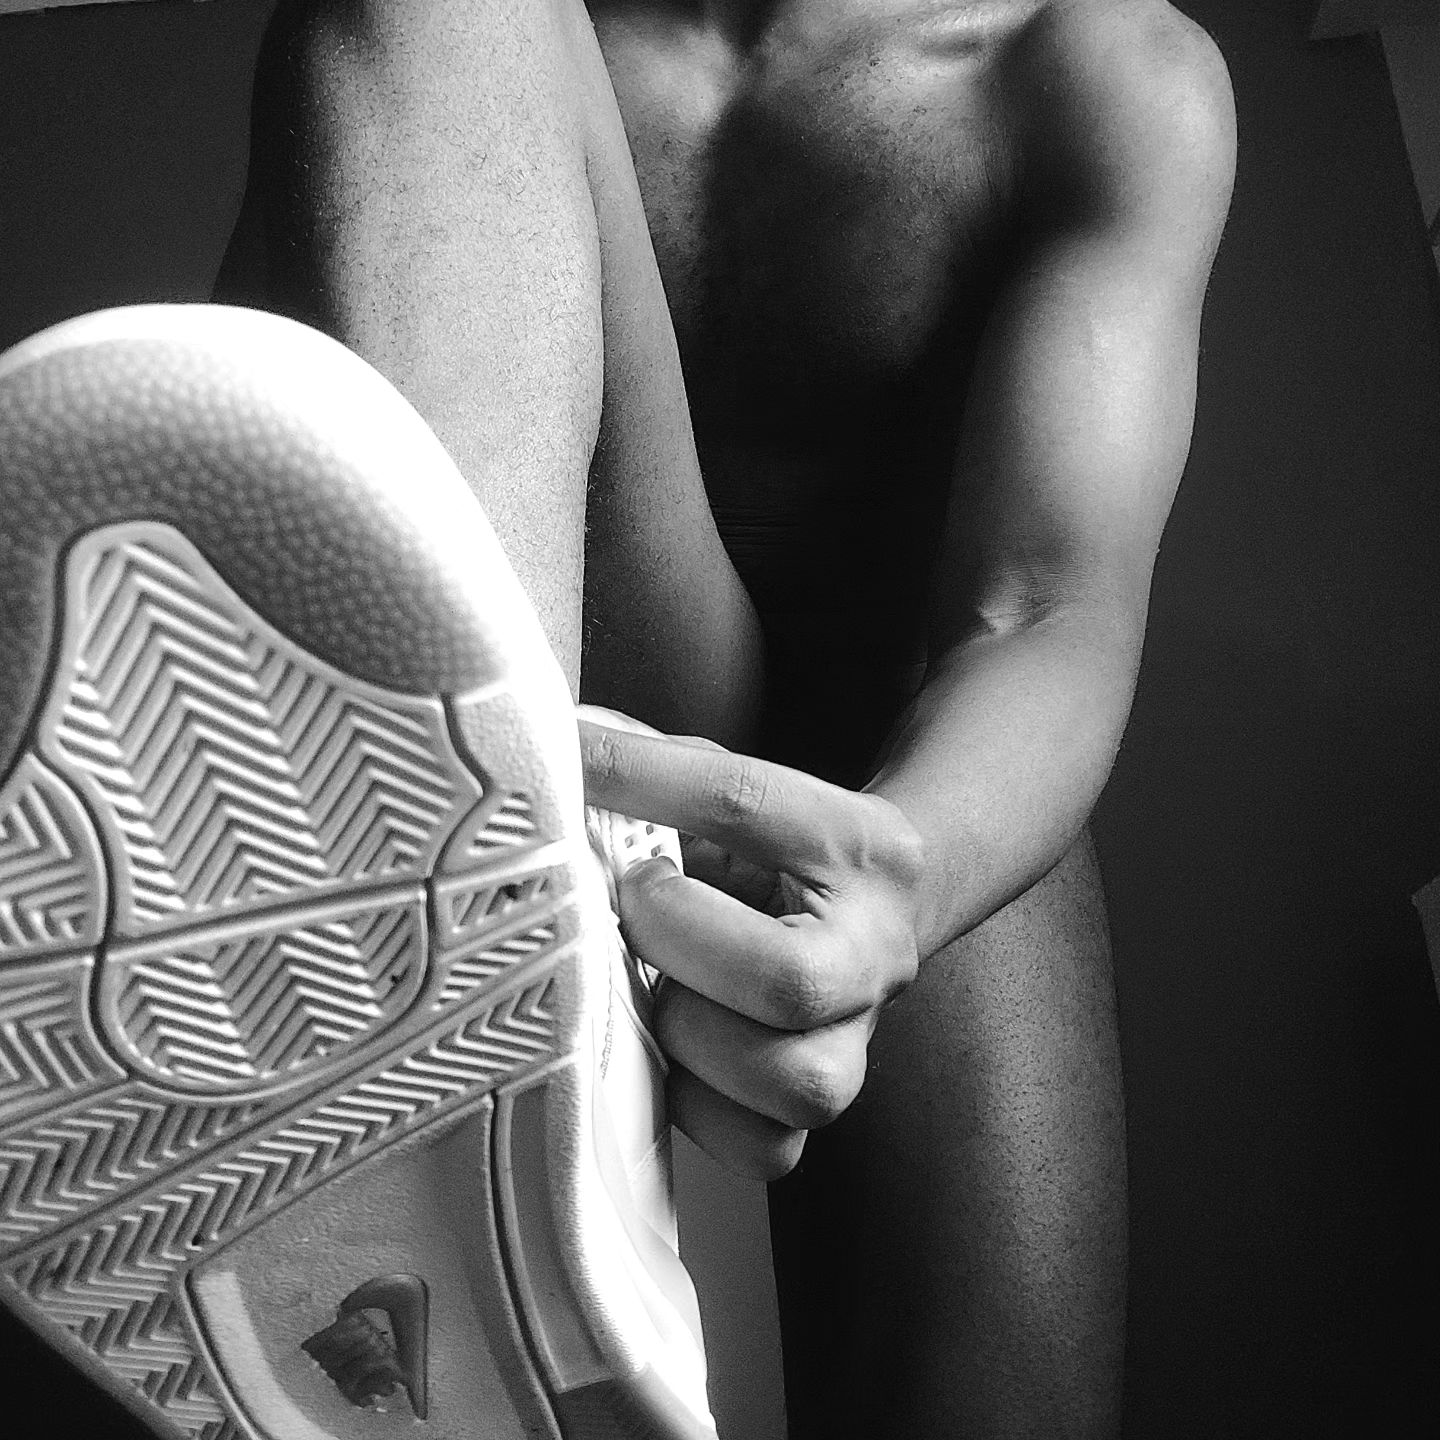 Just trying on some shoes

#nike #sneakers #trainers #model #contentcreator #blackandwhite #blackandwhitephotography